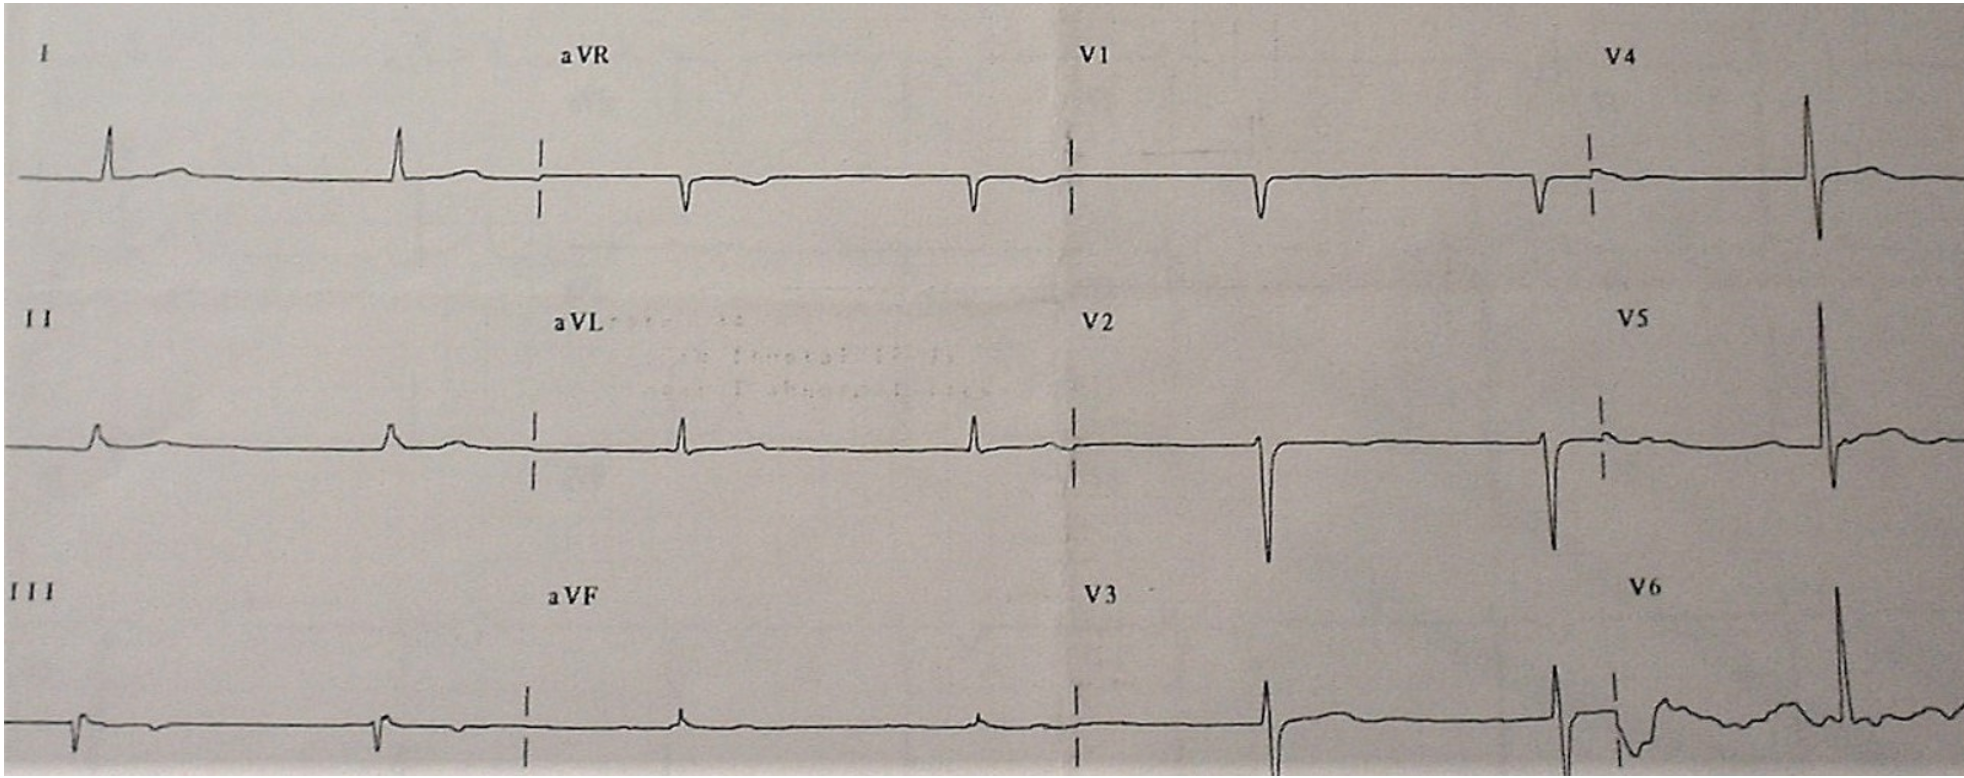 Cardiology Case Report: Syncope and Bradycardia